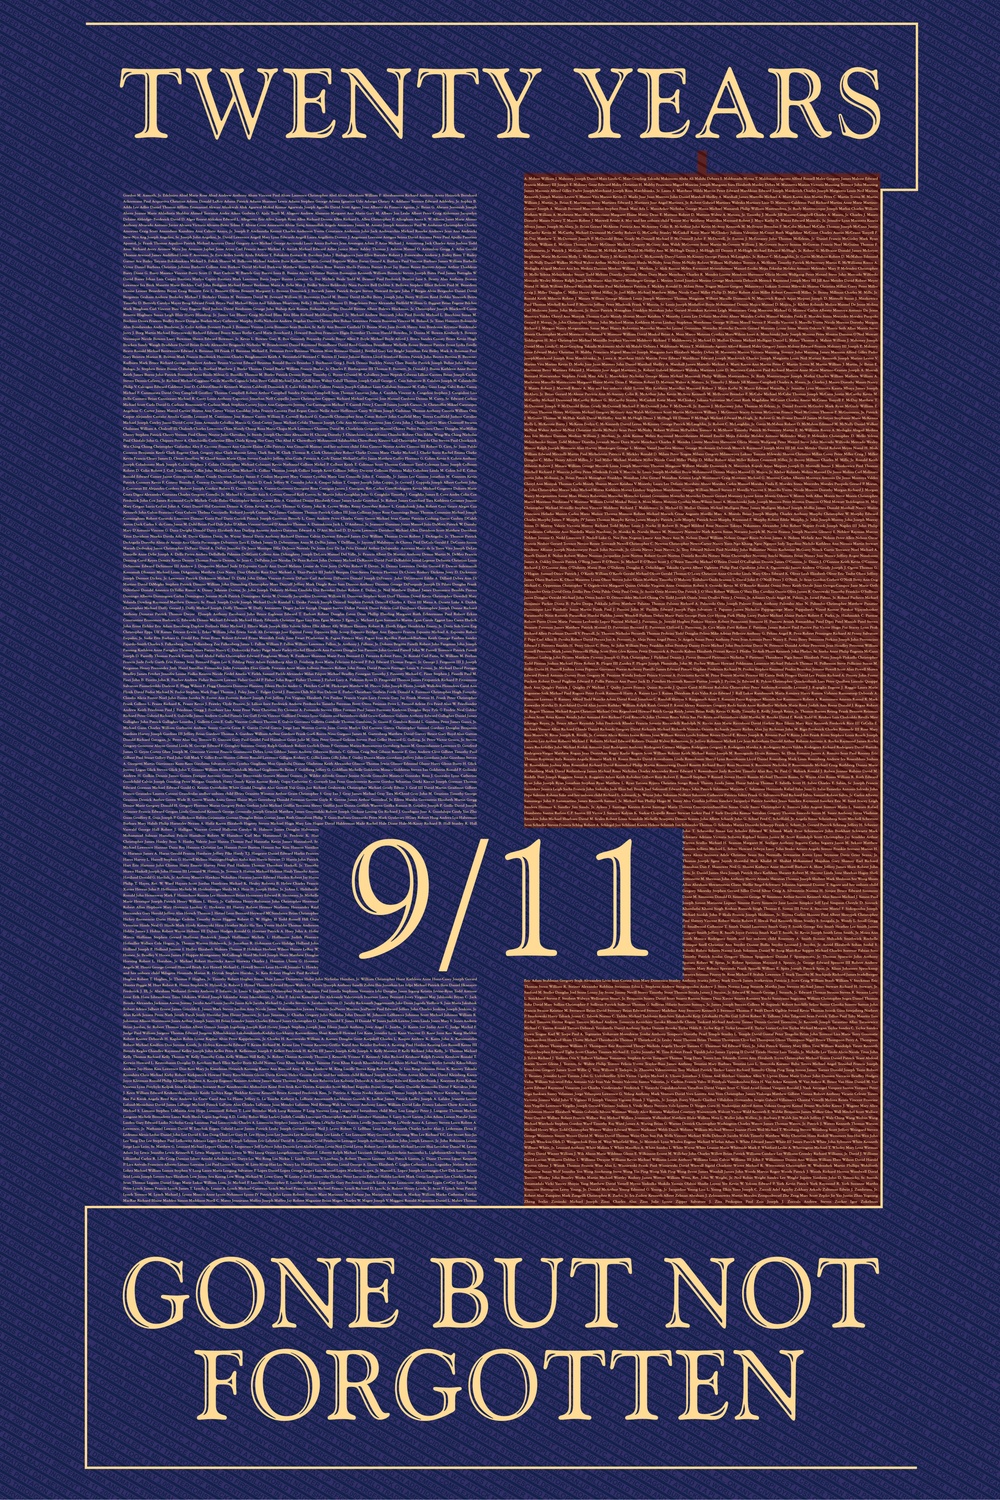 USS Carl Vinson (CVN 70) 9/11 Rememberence Graphic